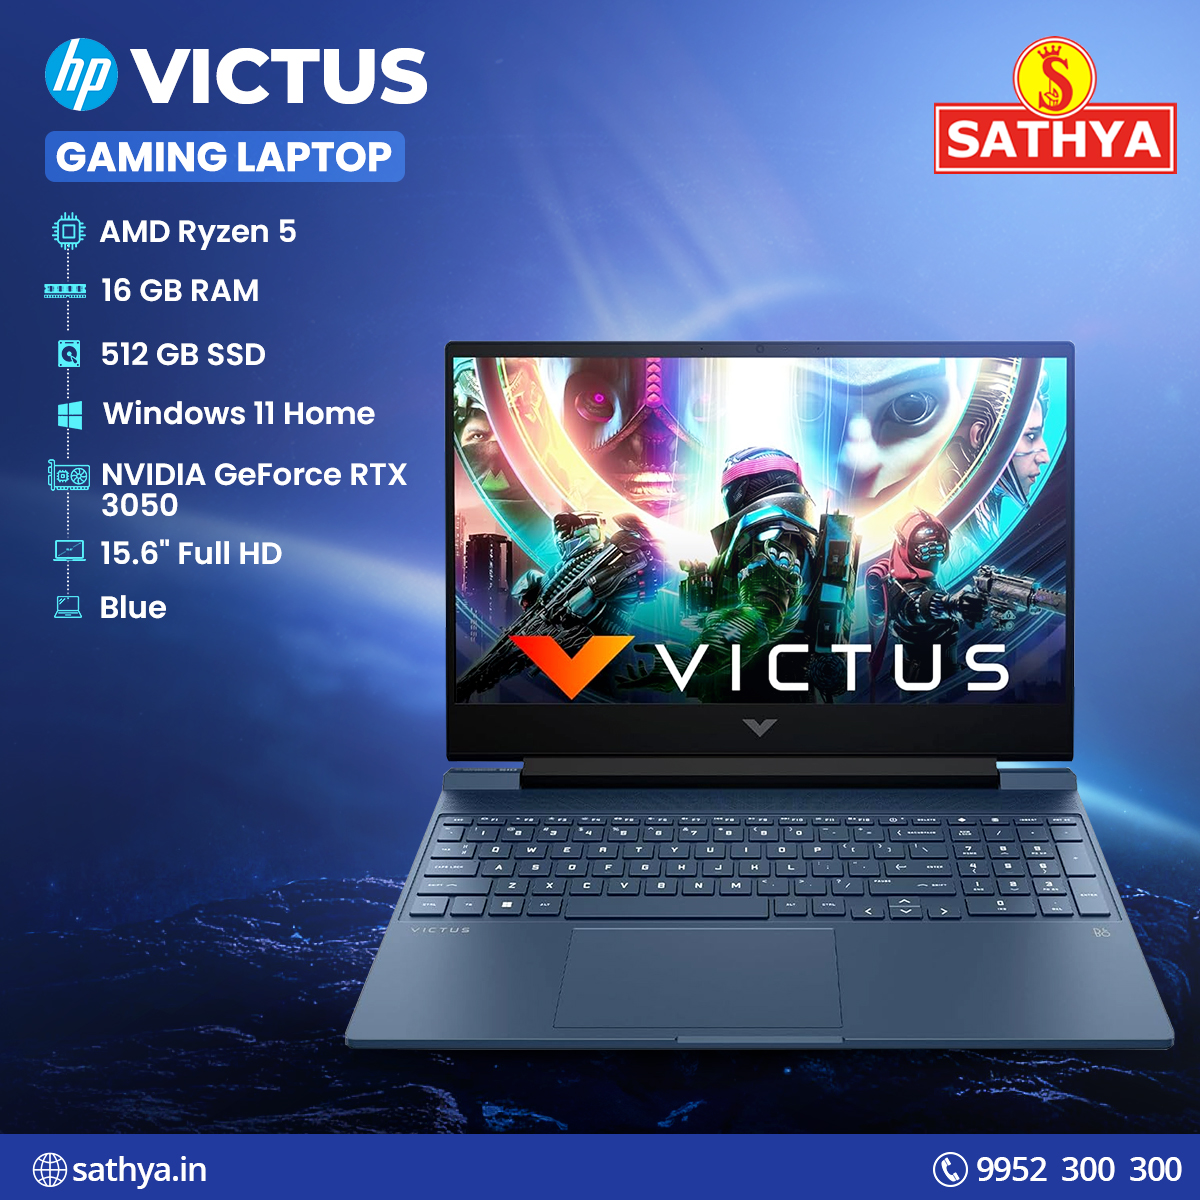 Precision, Speed, Dominance! Level up your #gaming rig with HP Victus #GamingLaptop designed for performance and style. Call 9952300300 for details.

🛒Order here : bit.ly/4aSNuu0

#laptop #GAME #gamers #shopping #shop #onlineshopping #OnlineGames #hp #hplaptop